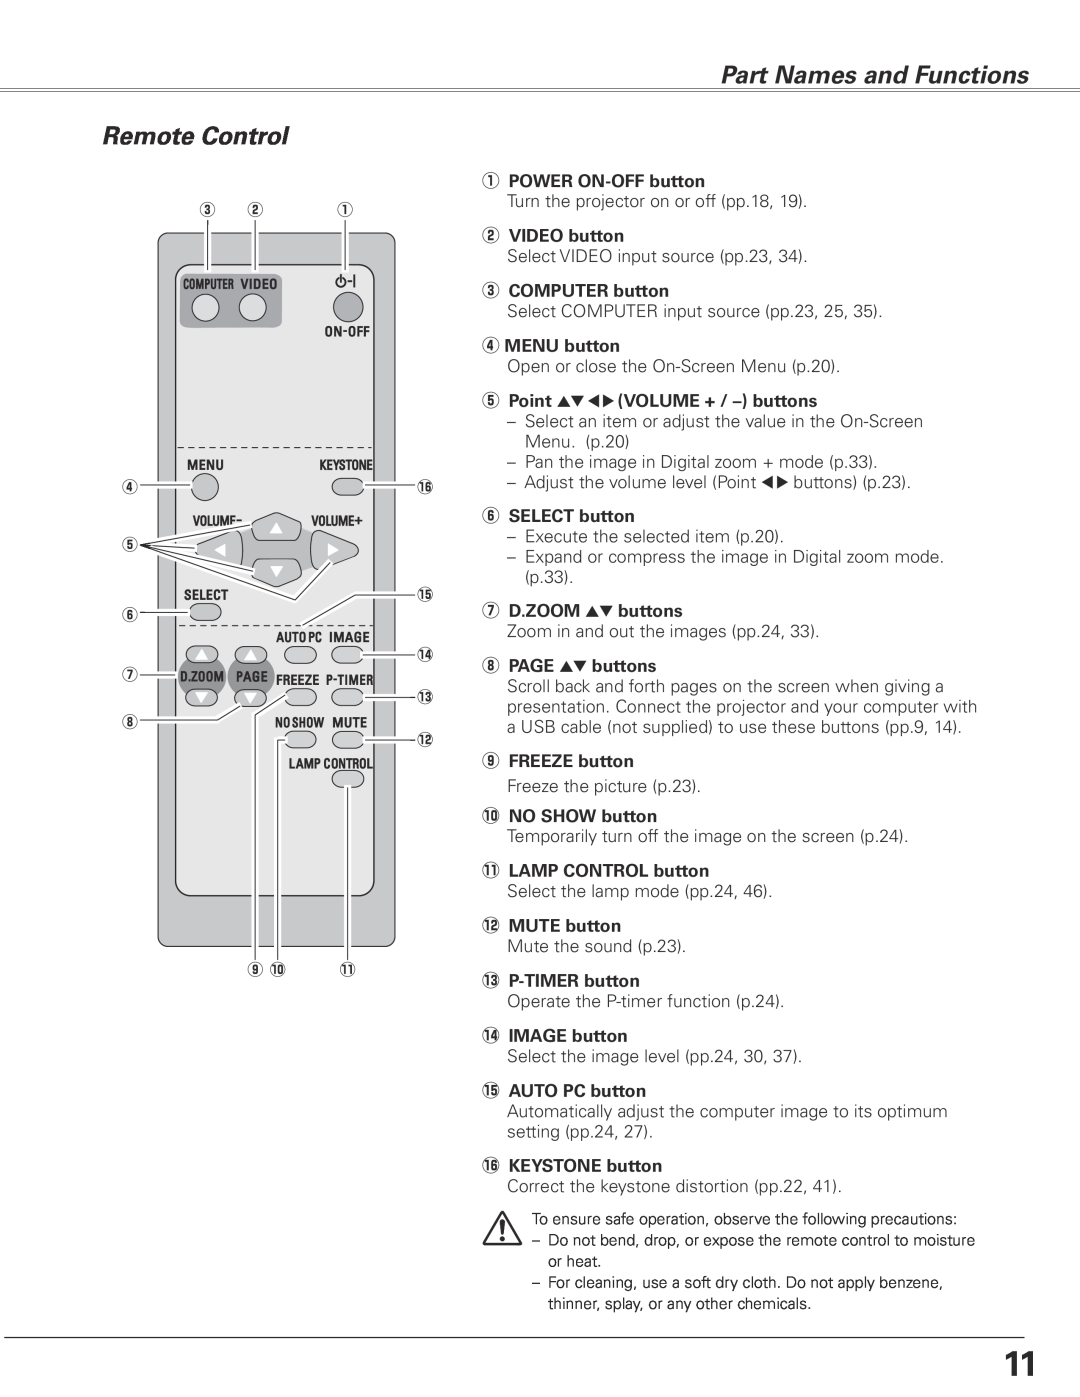 Sanyo PLC-XL45 owner manual Remote Control, Part Names and Functions, qPOWER ON-OFFbutton, wVIDEO button, eCOMPUTER button 